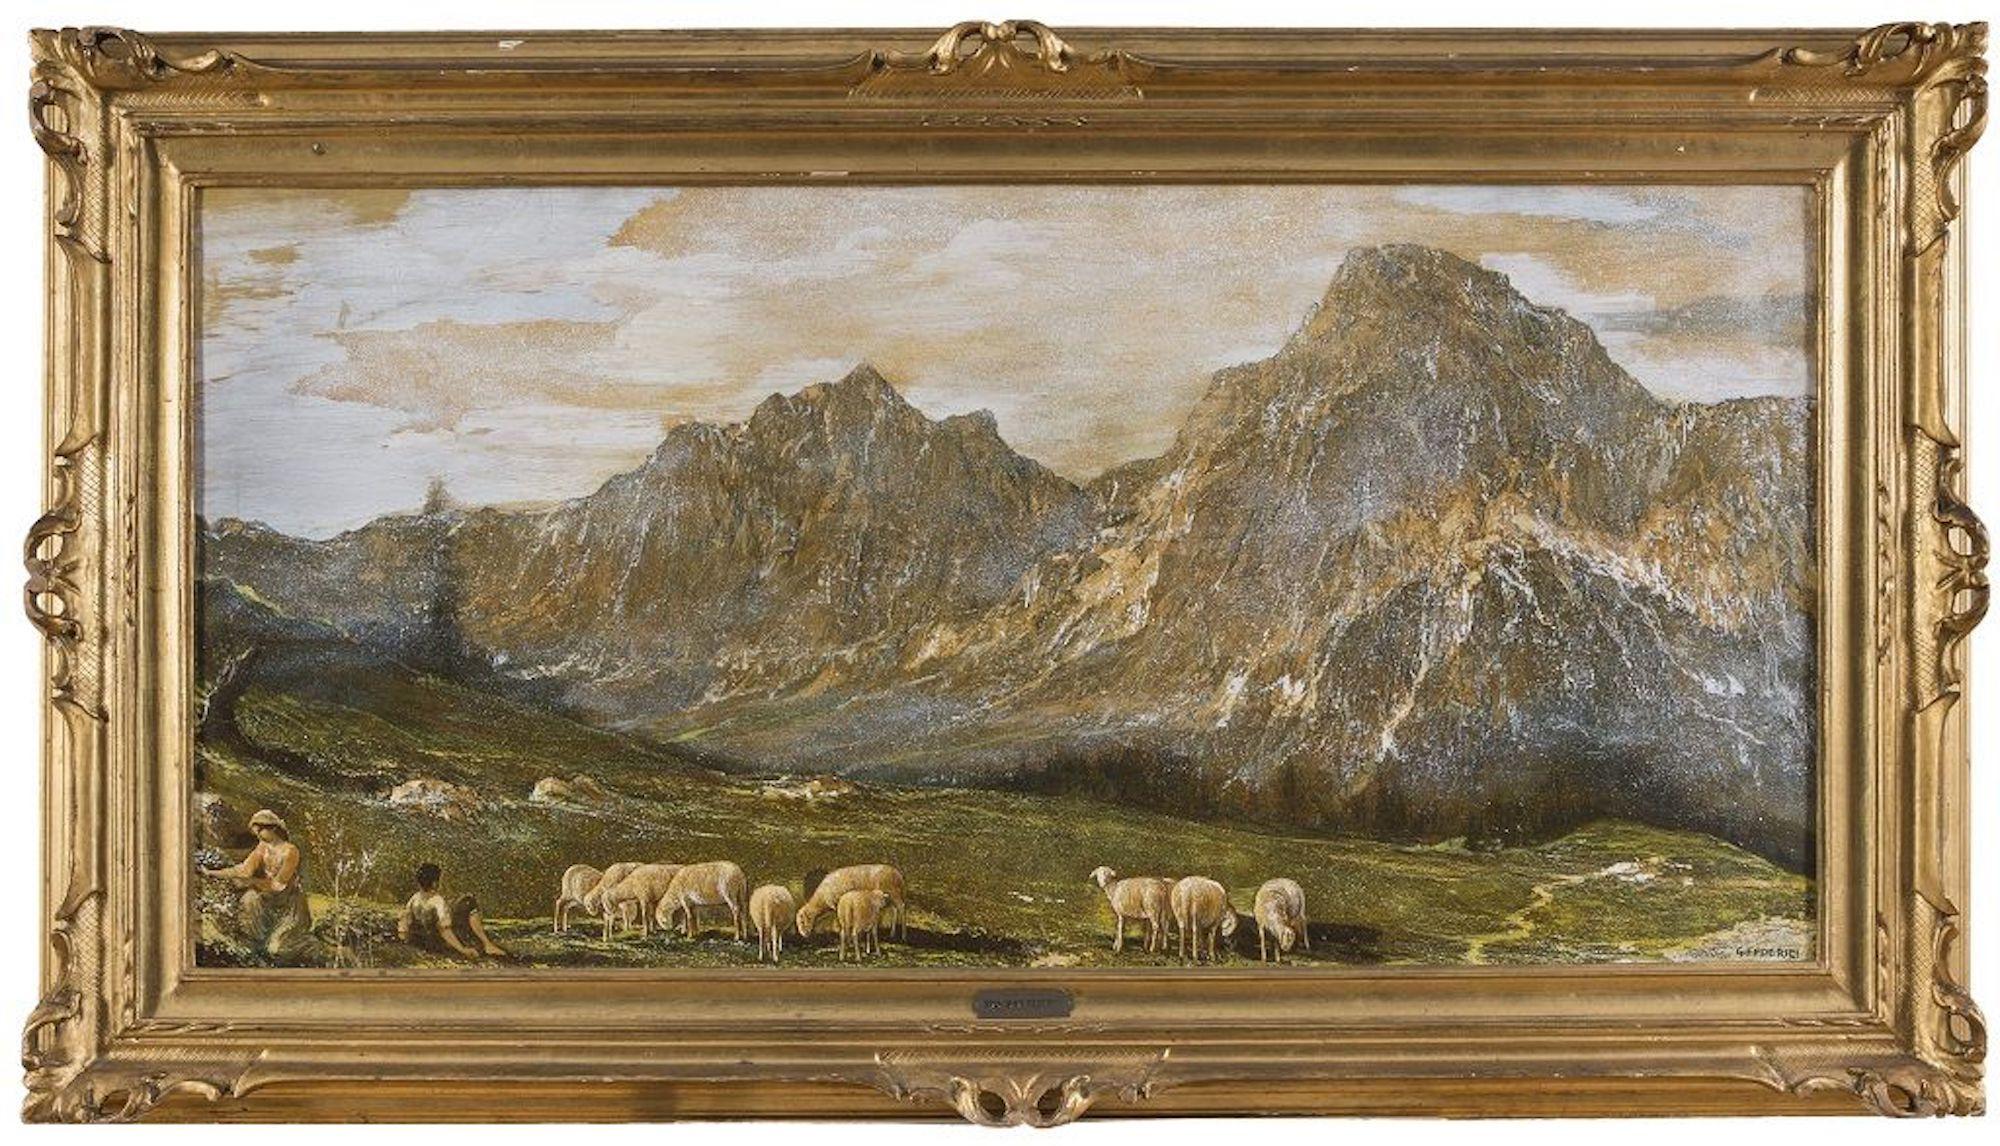 Mountainscape with Pasture - Oil on Canvas by G. Federici - Early 20th Century